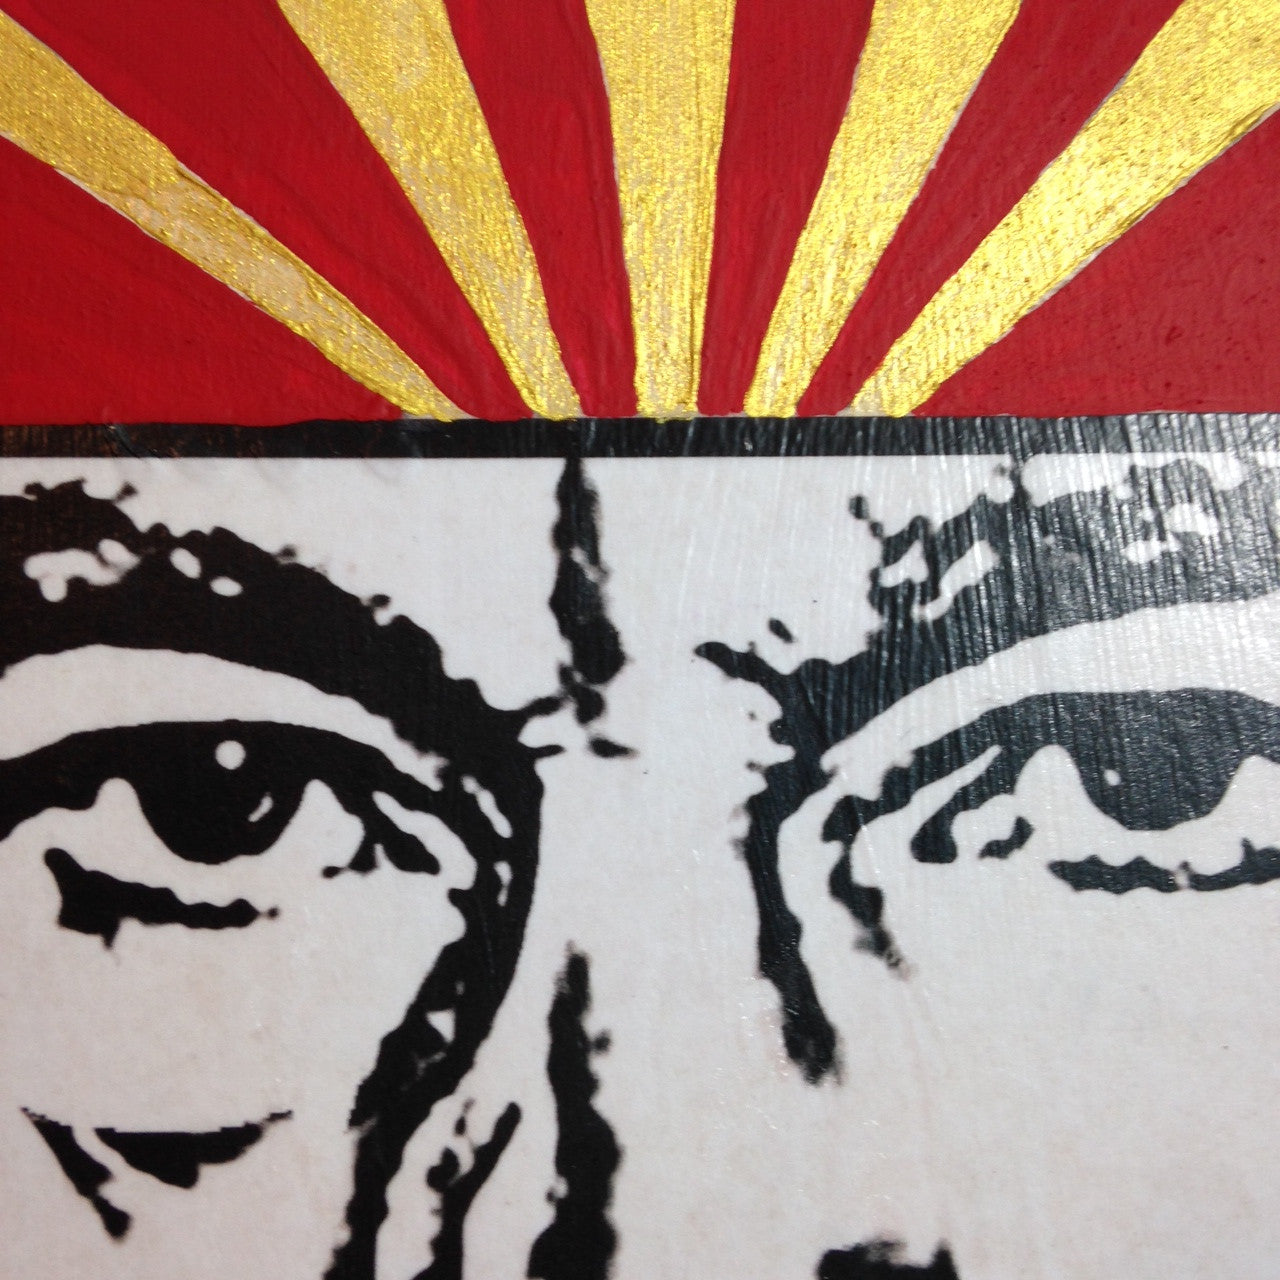 Day 139- ENGAGE- Tribute to Shepard Fairey (Reserved for Flo B. Moor)